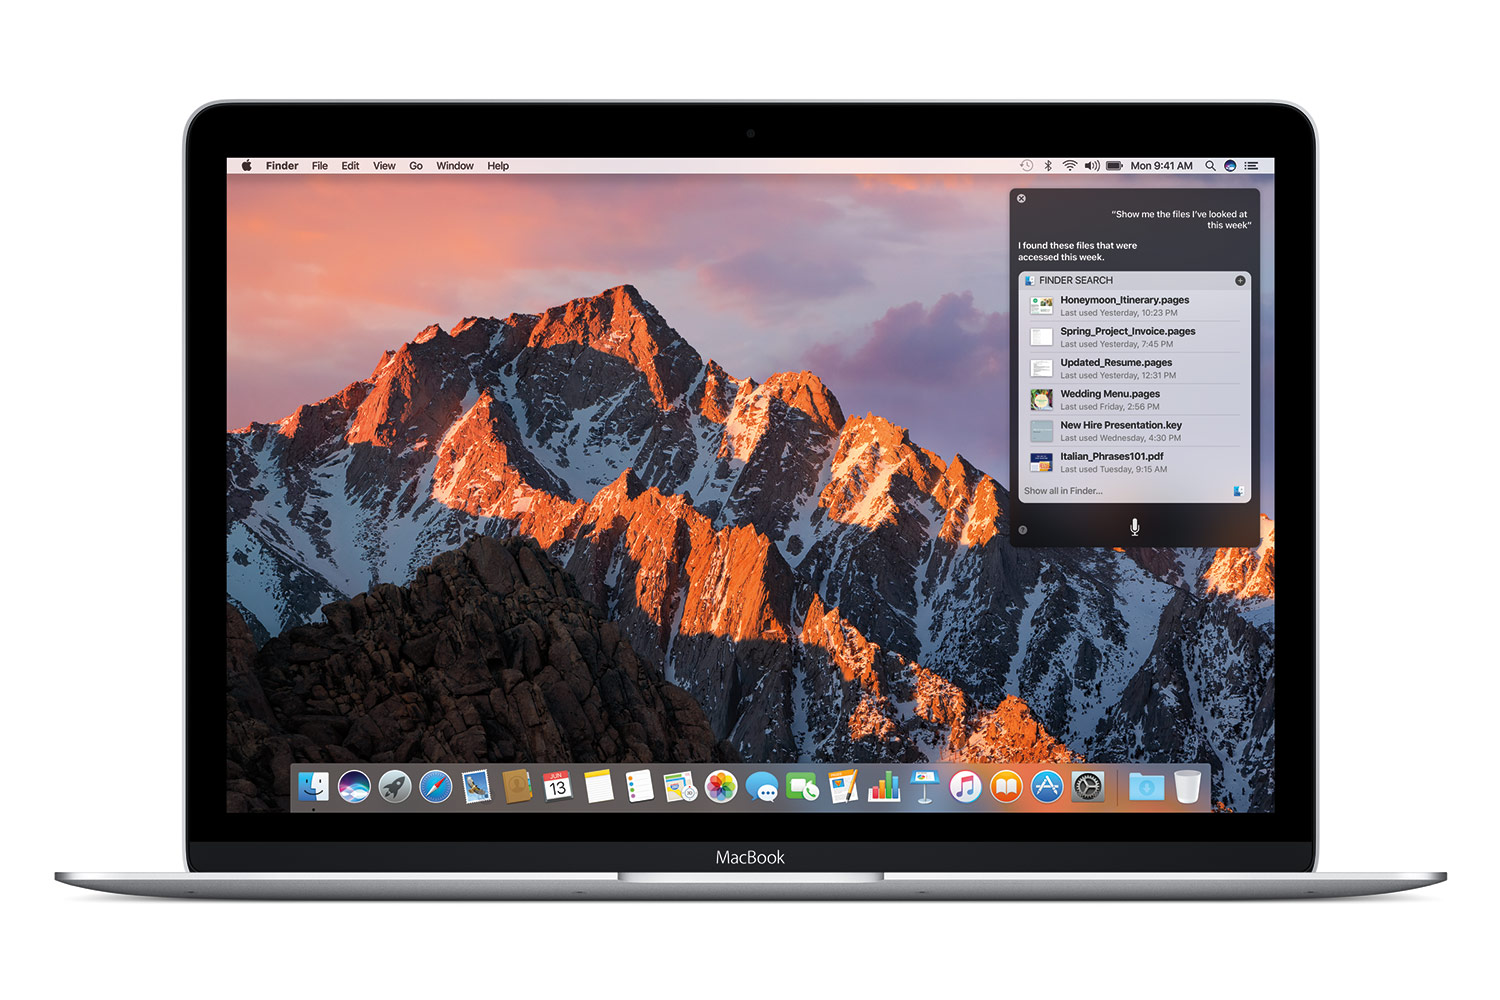 os x name change to macos and first version macossierra 001